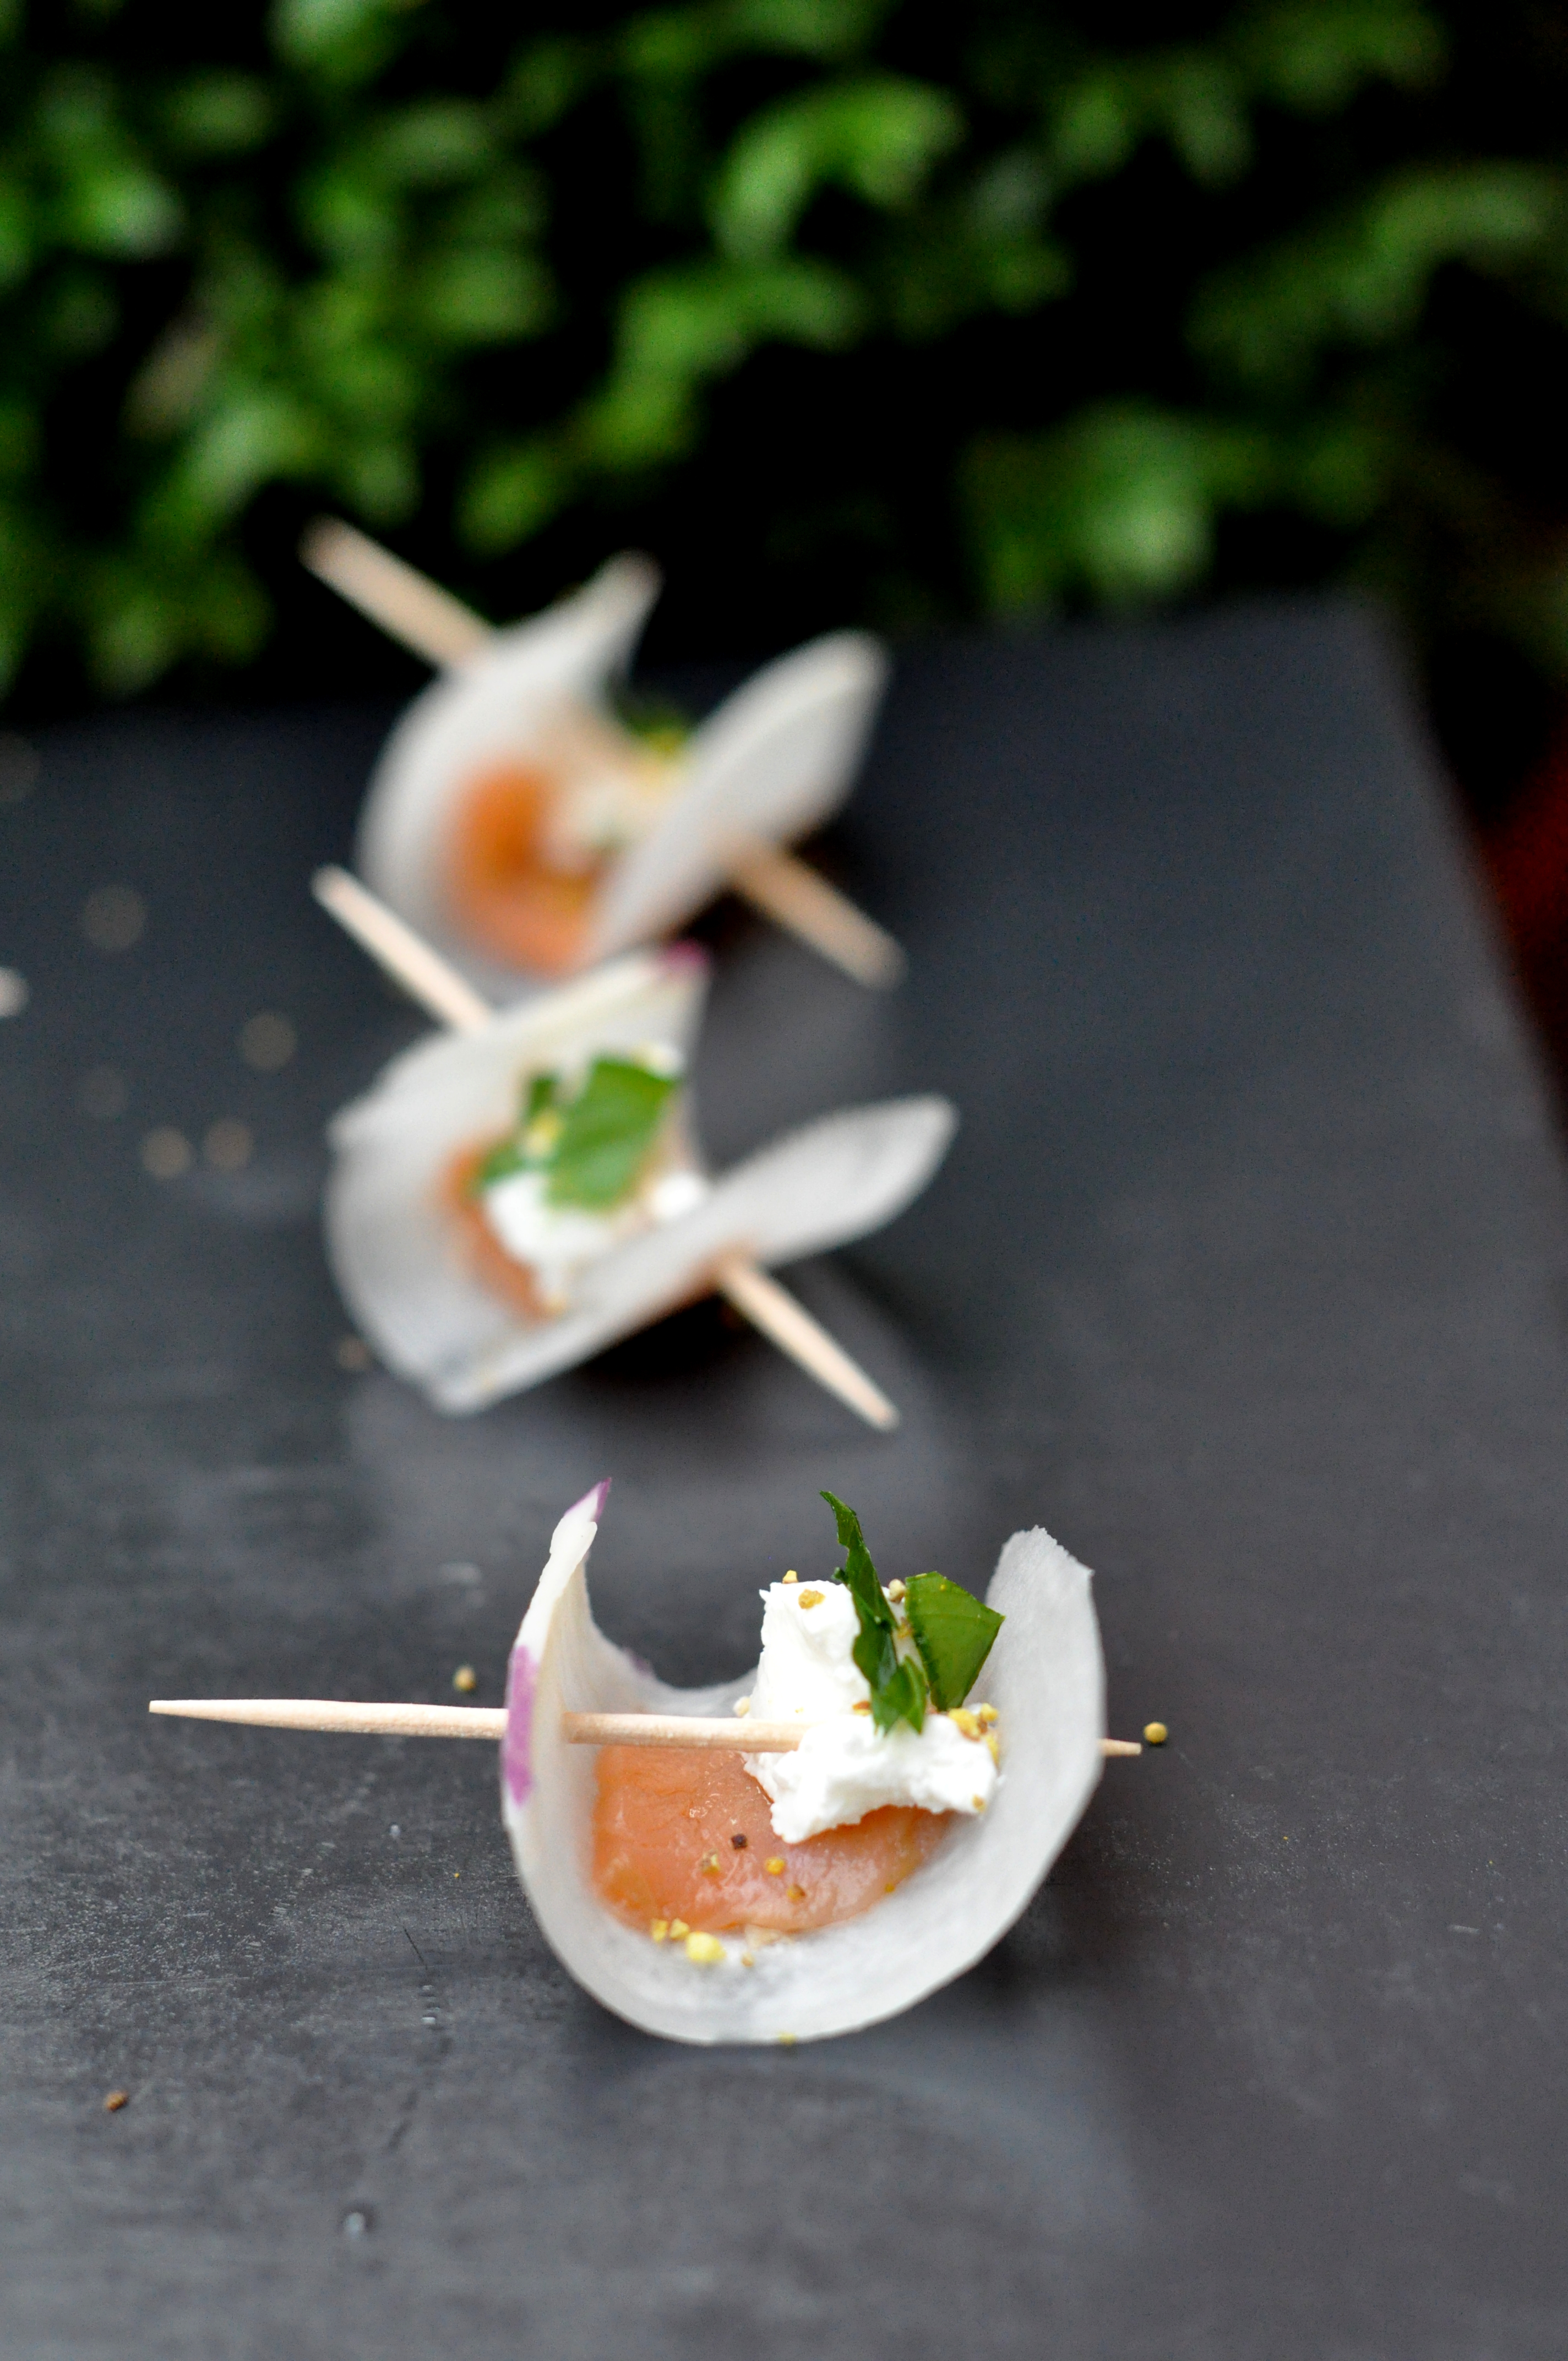 Turnip sails with smoked salmon and creamy goat cheese